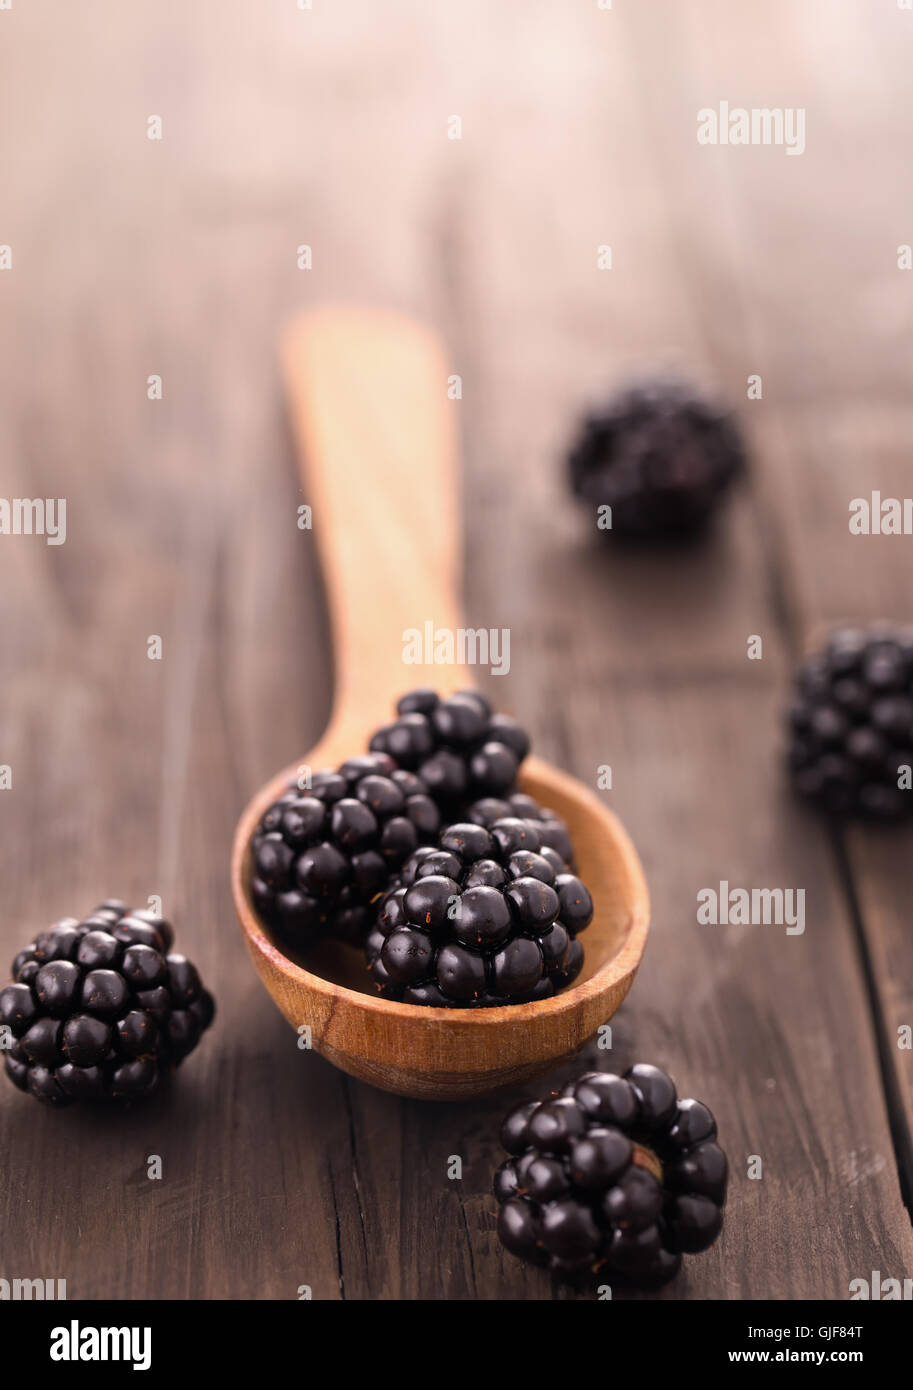 Blackberries with spoon on wooden background Stock Photo